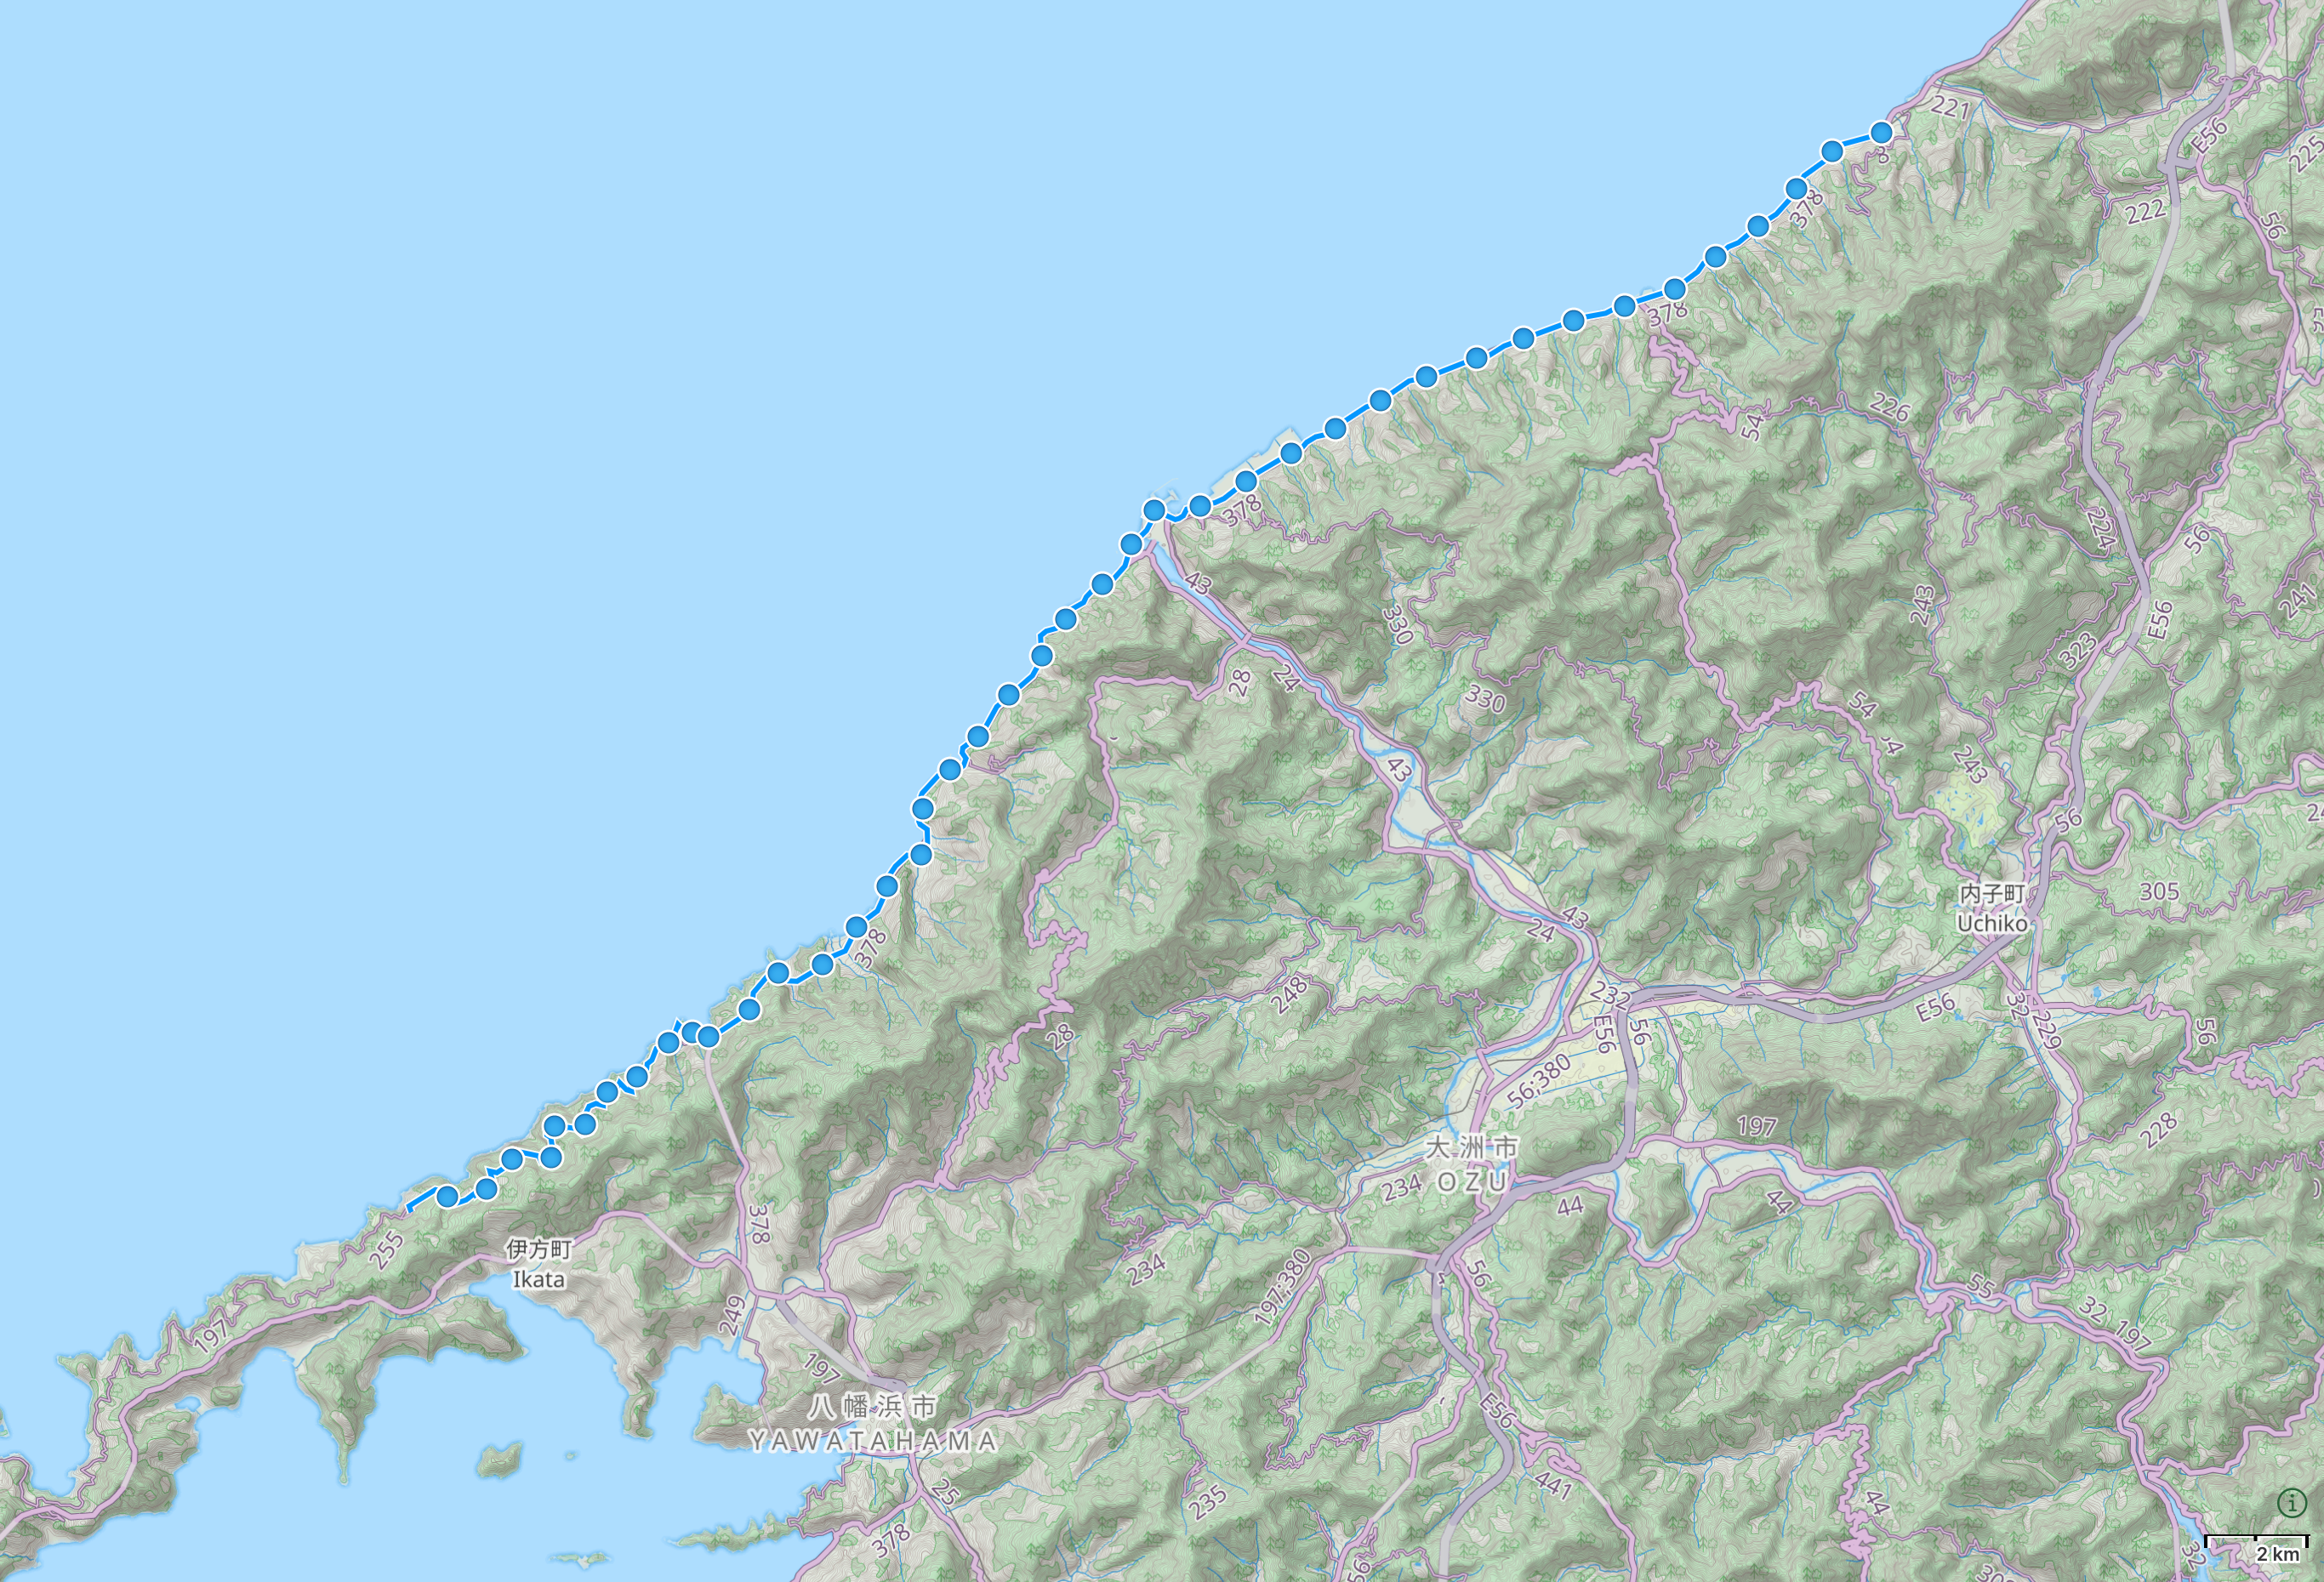 Map of Ehime Prefecture with author’s route between Kameura and Futami highlighted.